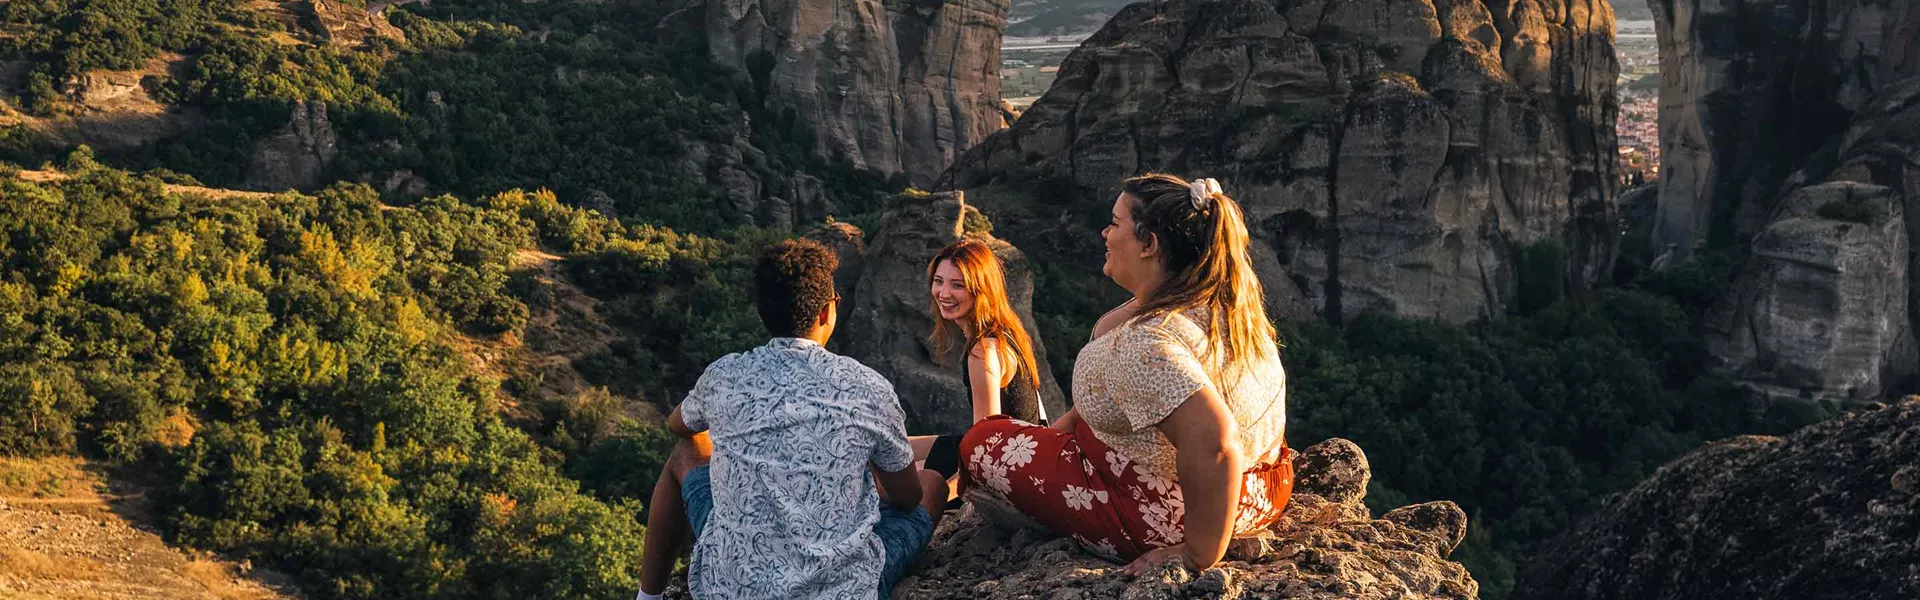 Group Sitting On Mountain Over Trees In Greece 